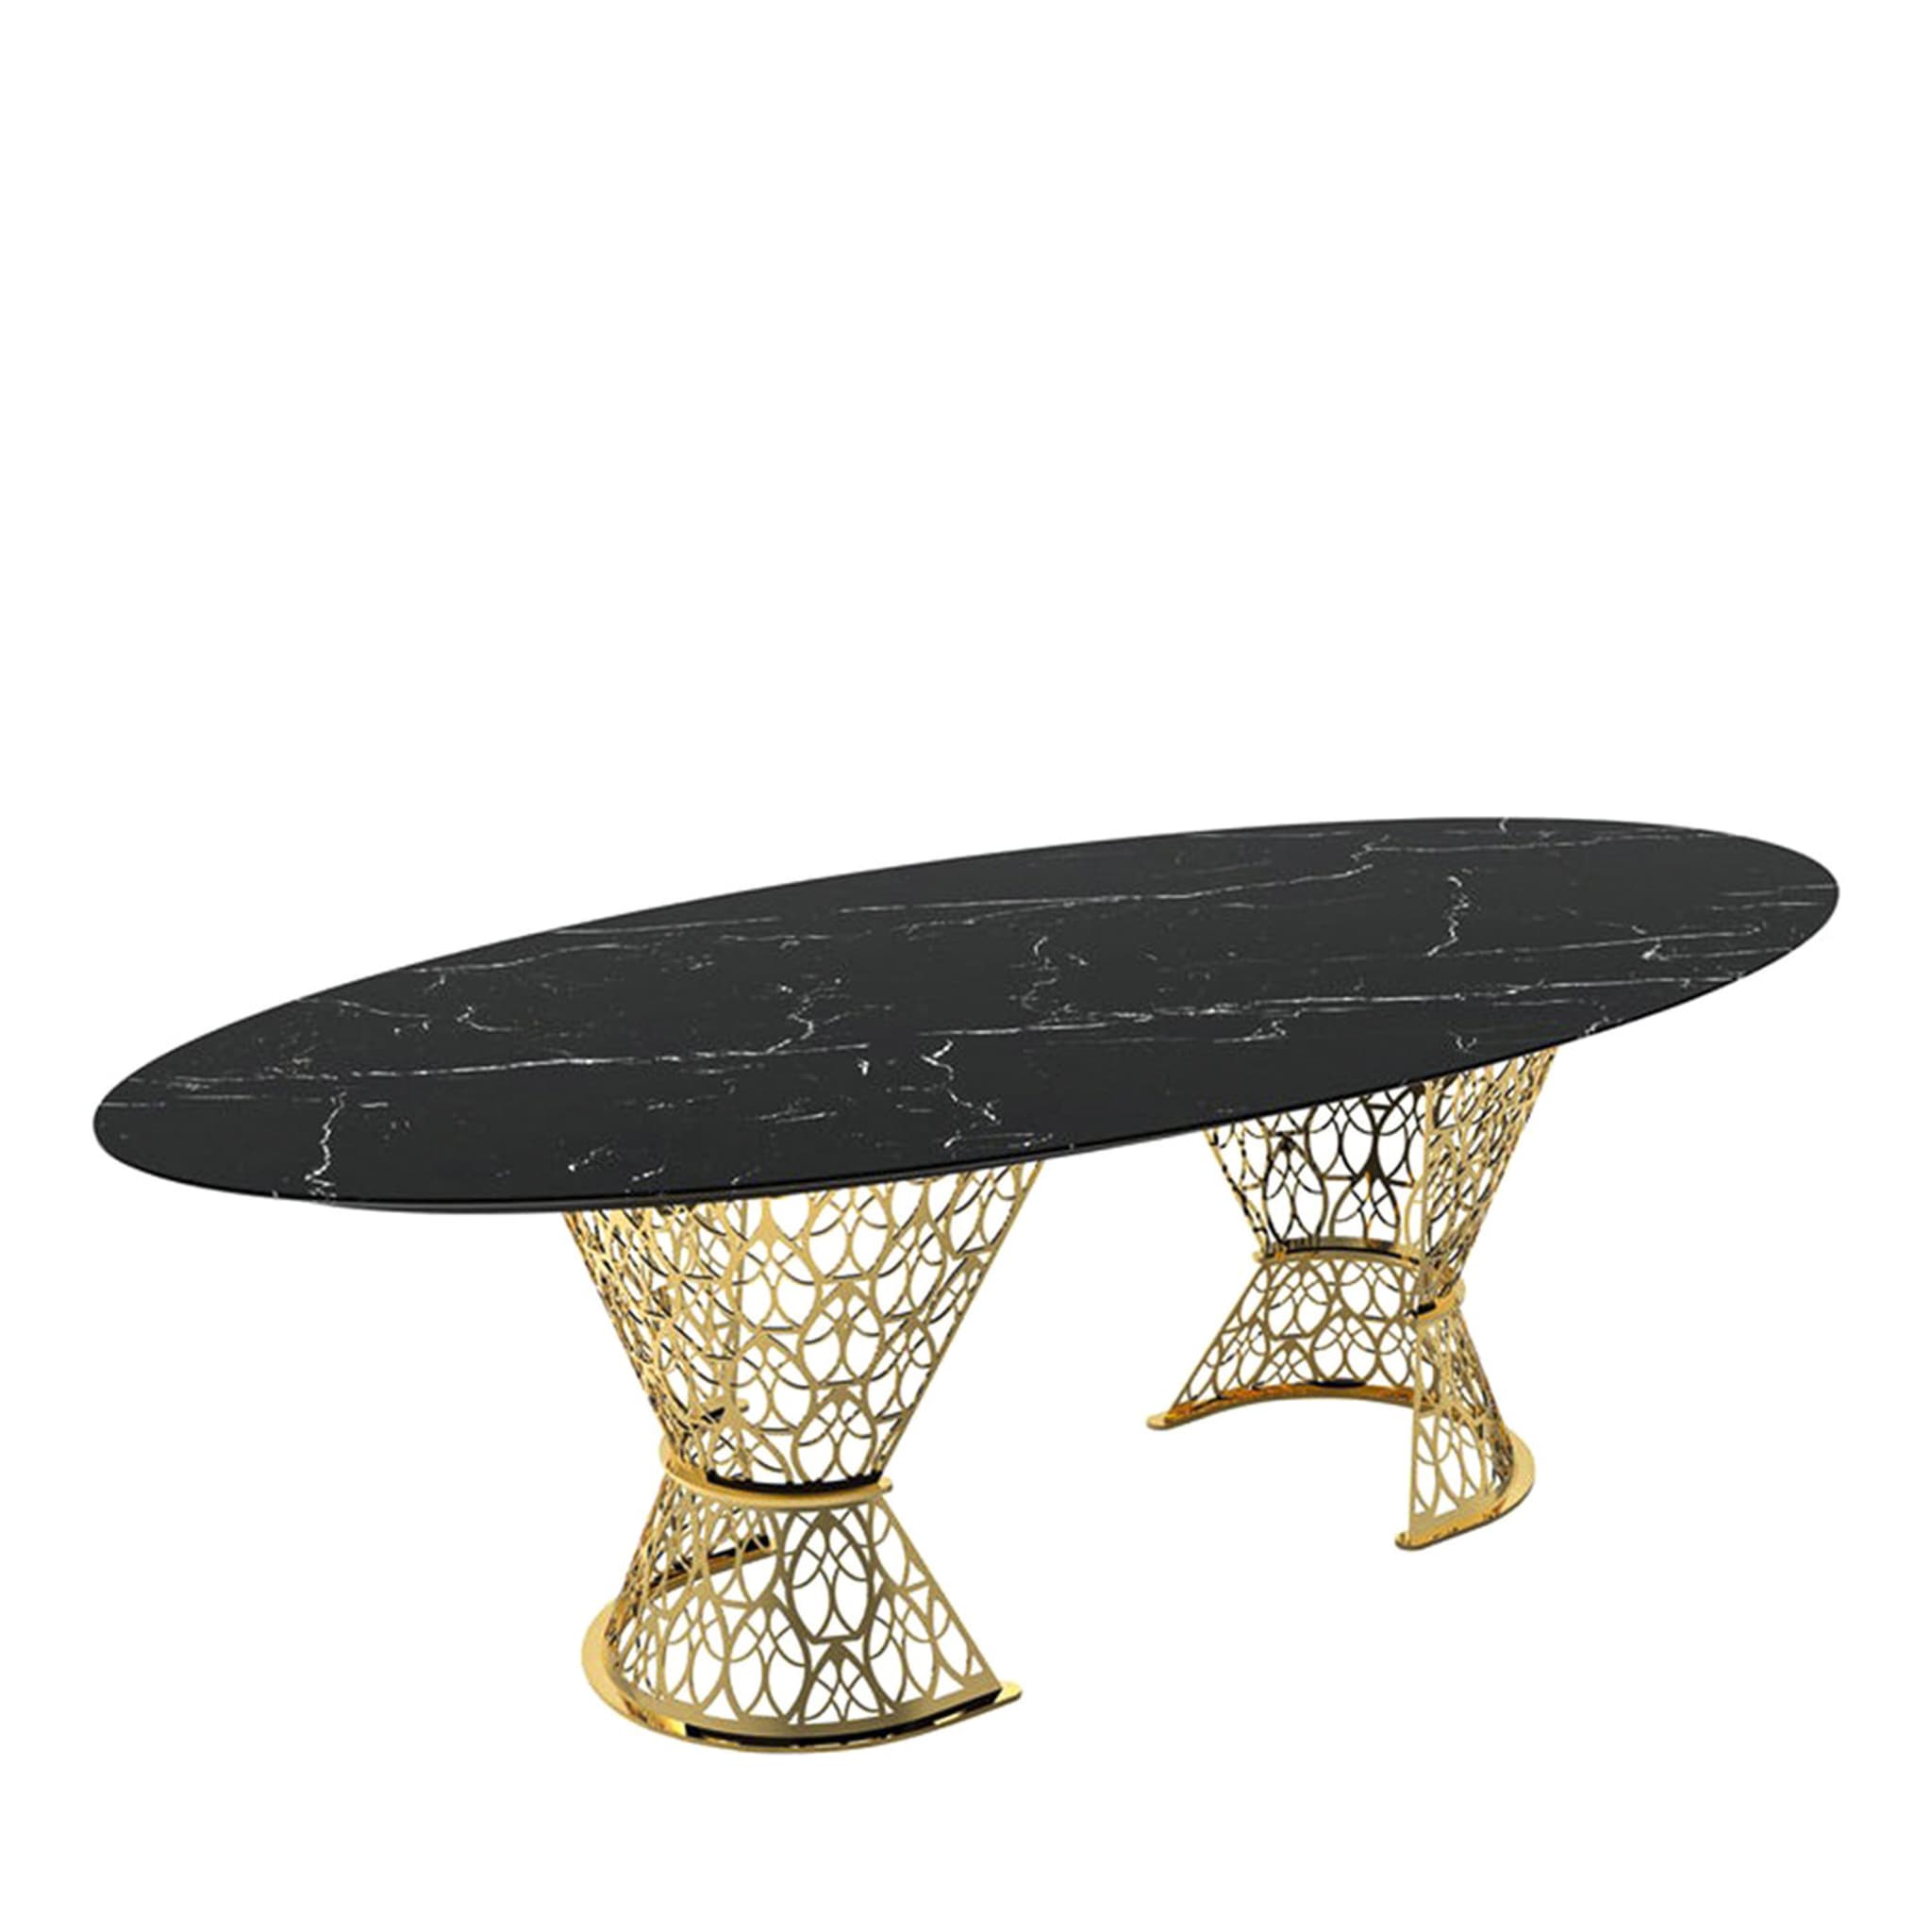 Gatsby Arabesque Table with Black Marquinia Marble Top - Main view